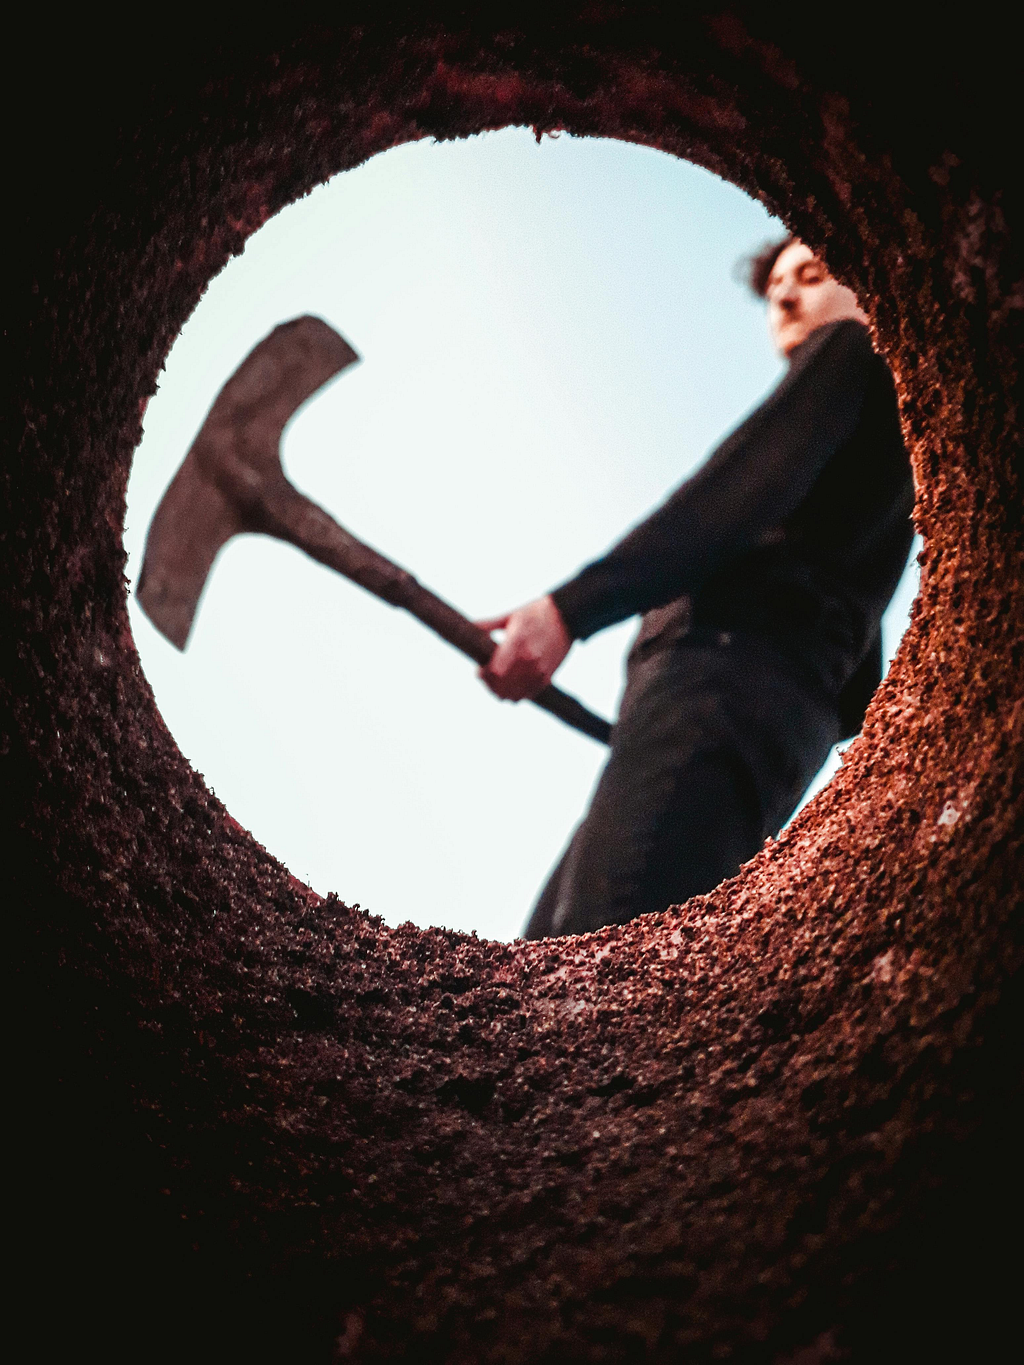 Photo from well of man digging a hole